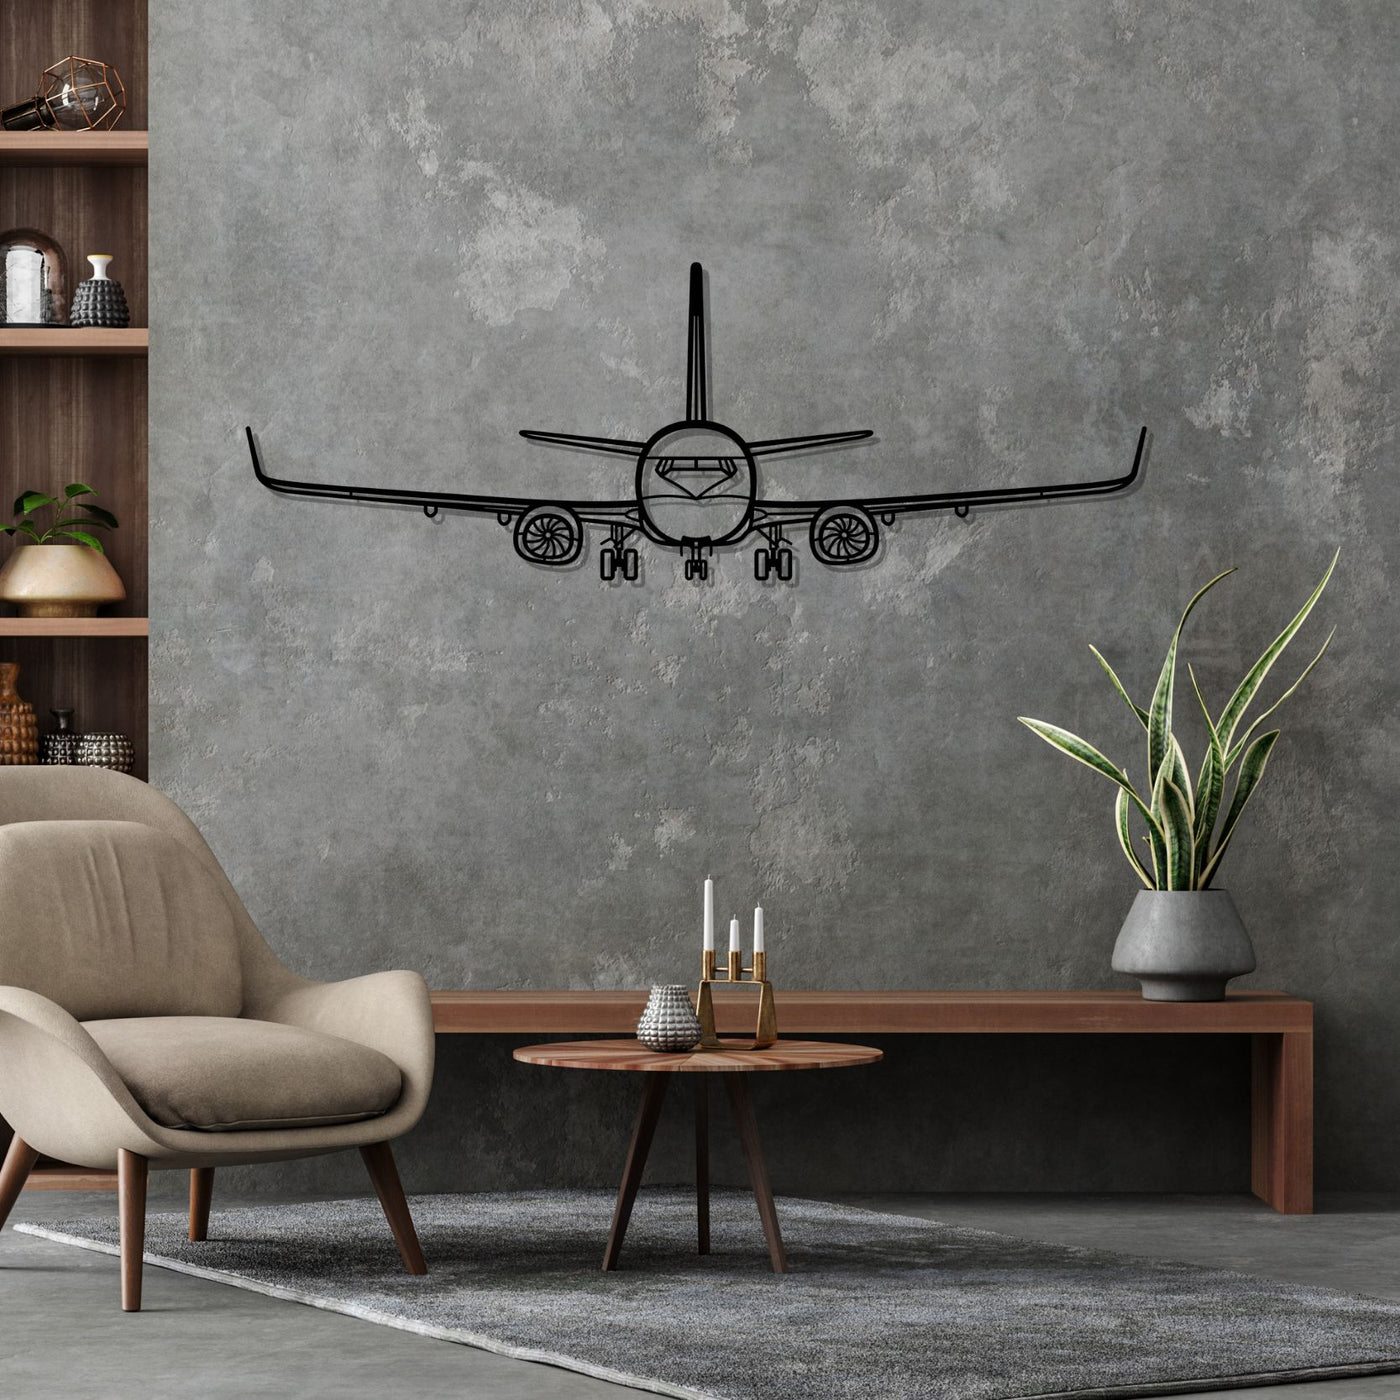 737-800NG Front Silhouette Metal Wall Art